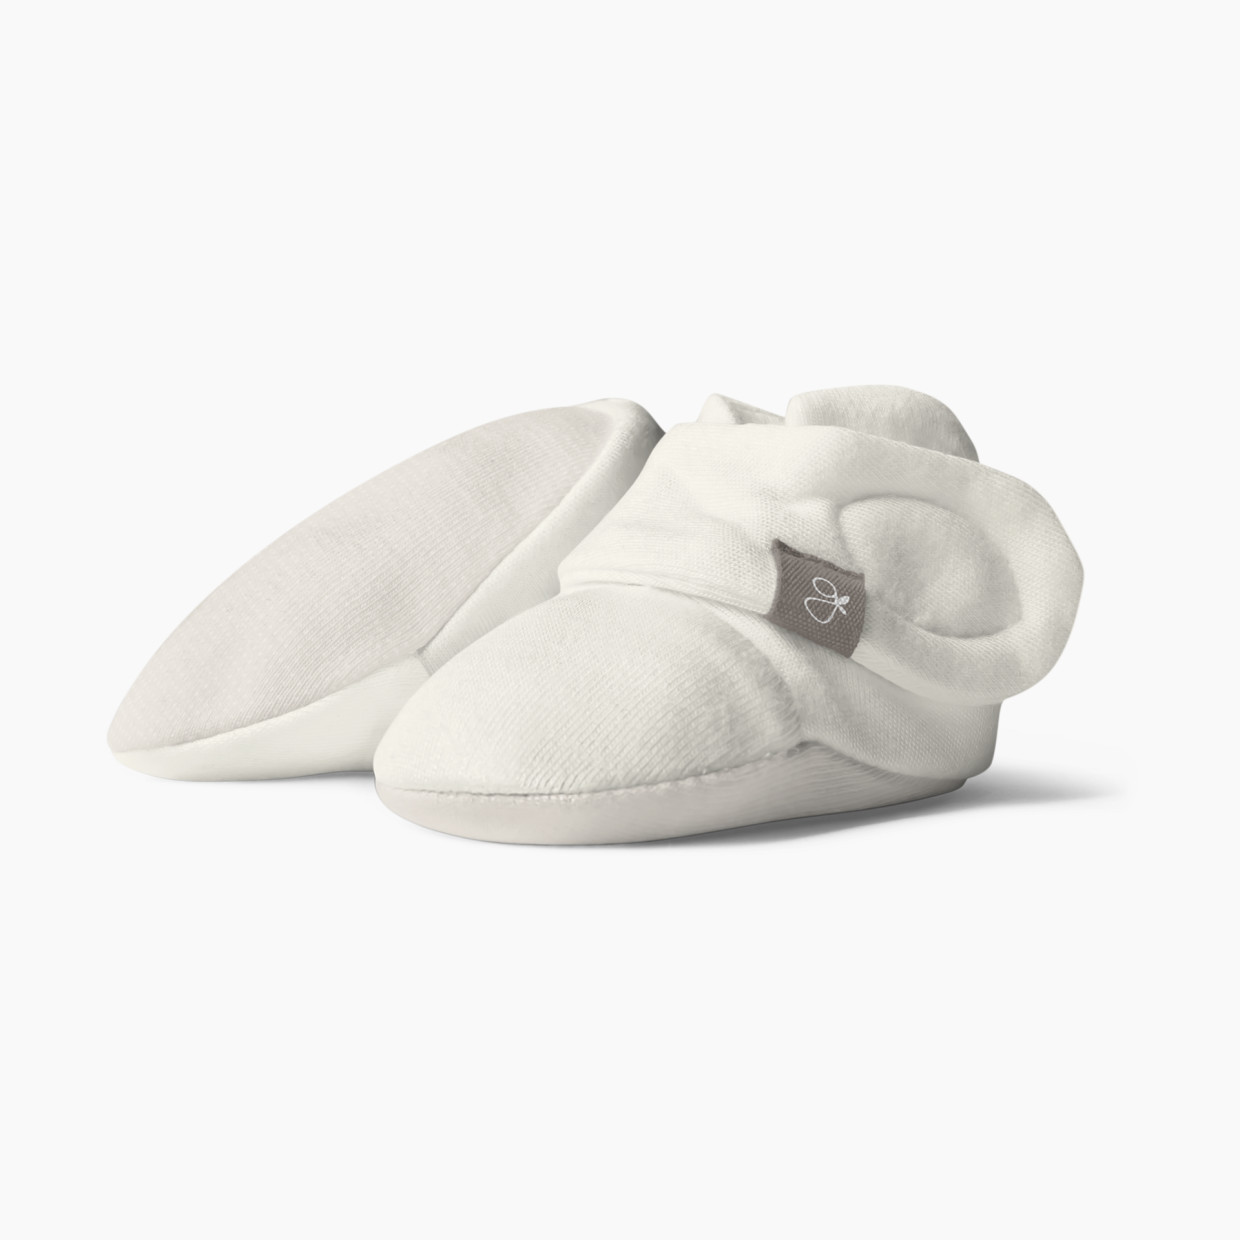 Goumi Kids Stay On Baby Boots - Cloud, 0-3 Months.